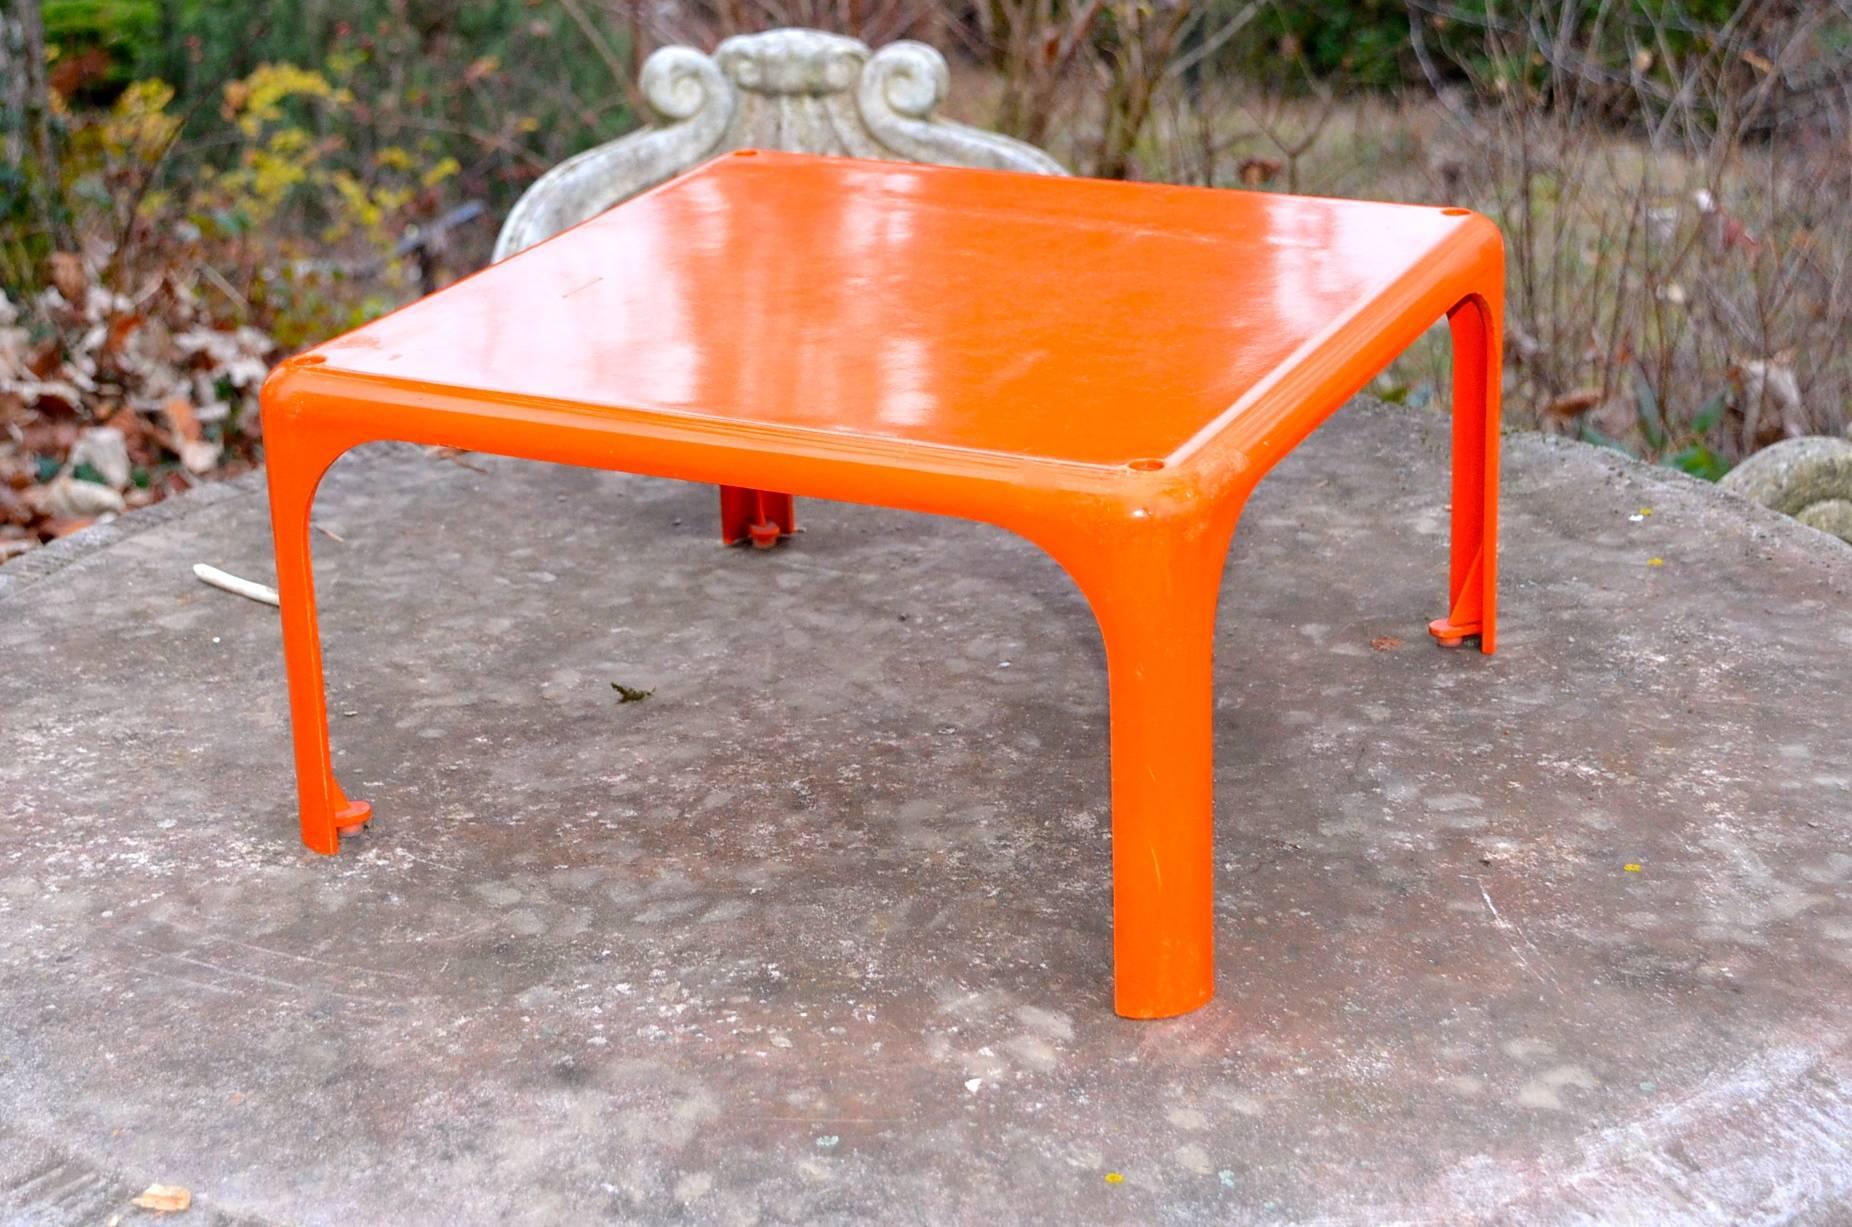 Set of three orange coffee table, model Demetrio 45 by Vico Magistretti for Artemide, Milan. Part of the MoMa collection of New York, they have been produced starting from 1966 and can be used as single table or stacked. In very good